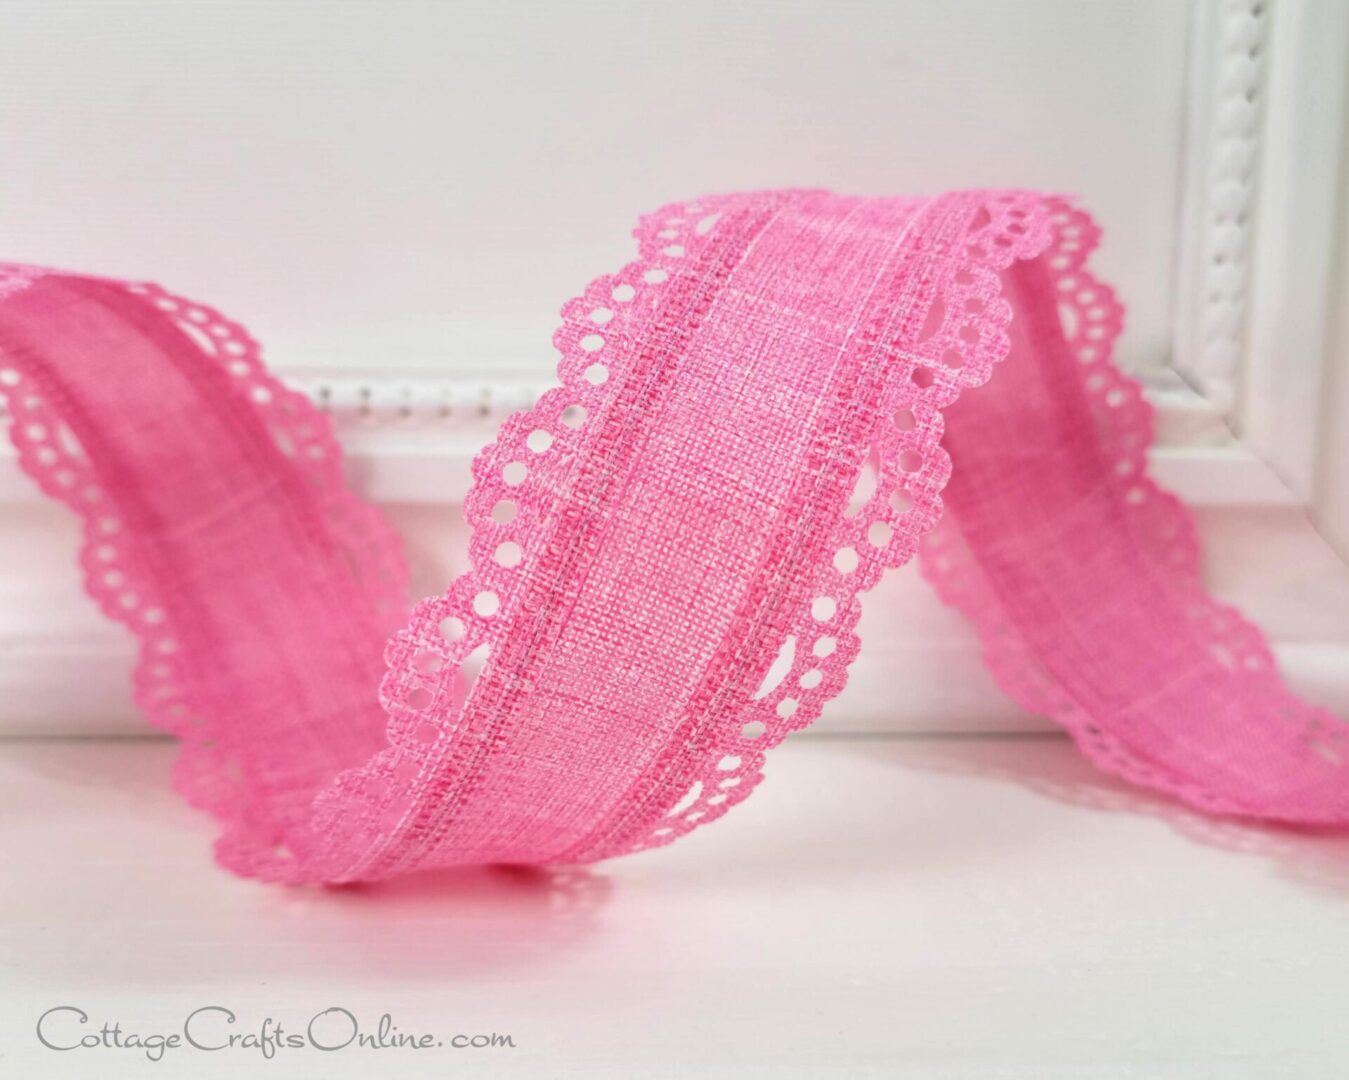 A pink ribbon with lace trim on it.